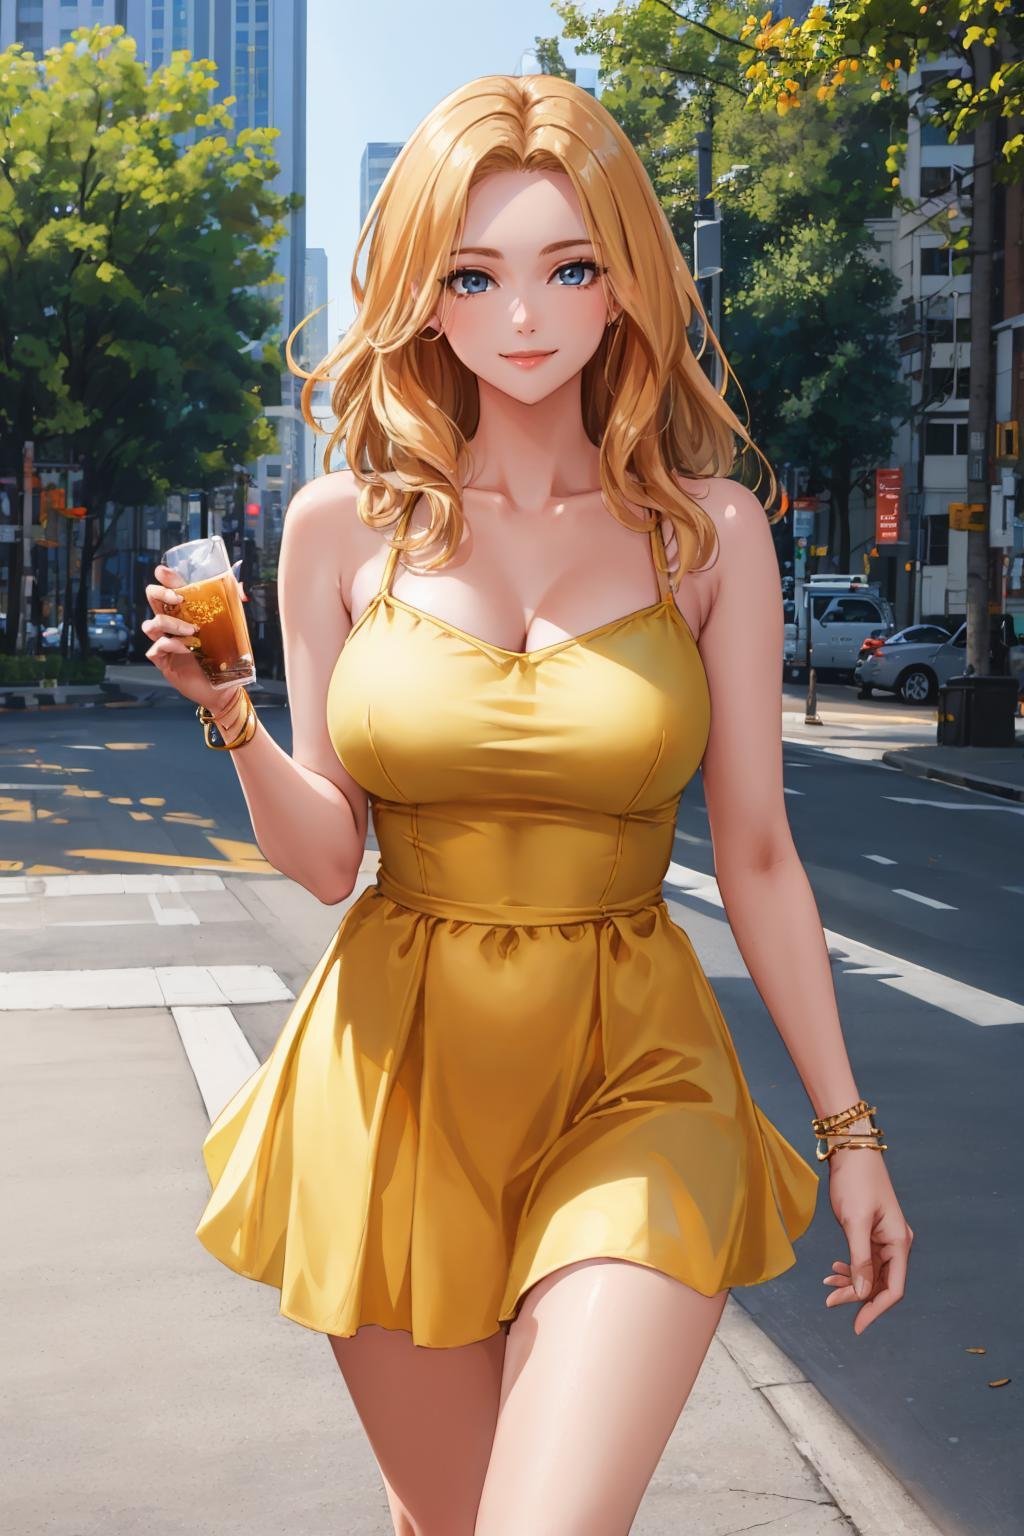 masterpiece, best quality, <lora:cptmarvel-nvwls-v1-000008:0.9> cptmarvel, yellow sundress, bracelet, large breasts, toned, standing, trees, park, cityscape, looking at viewer, smile